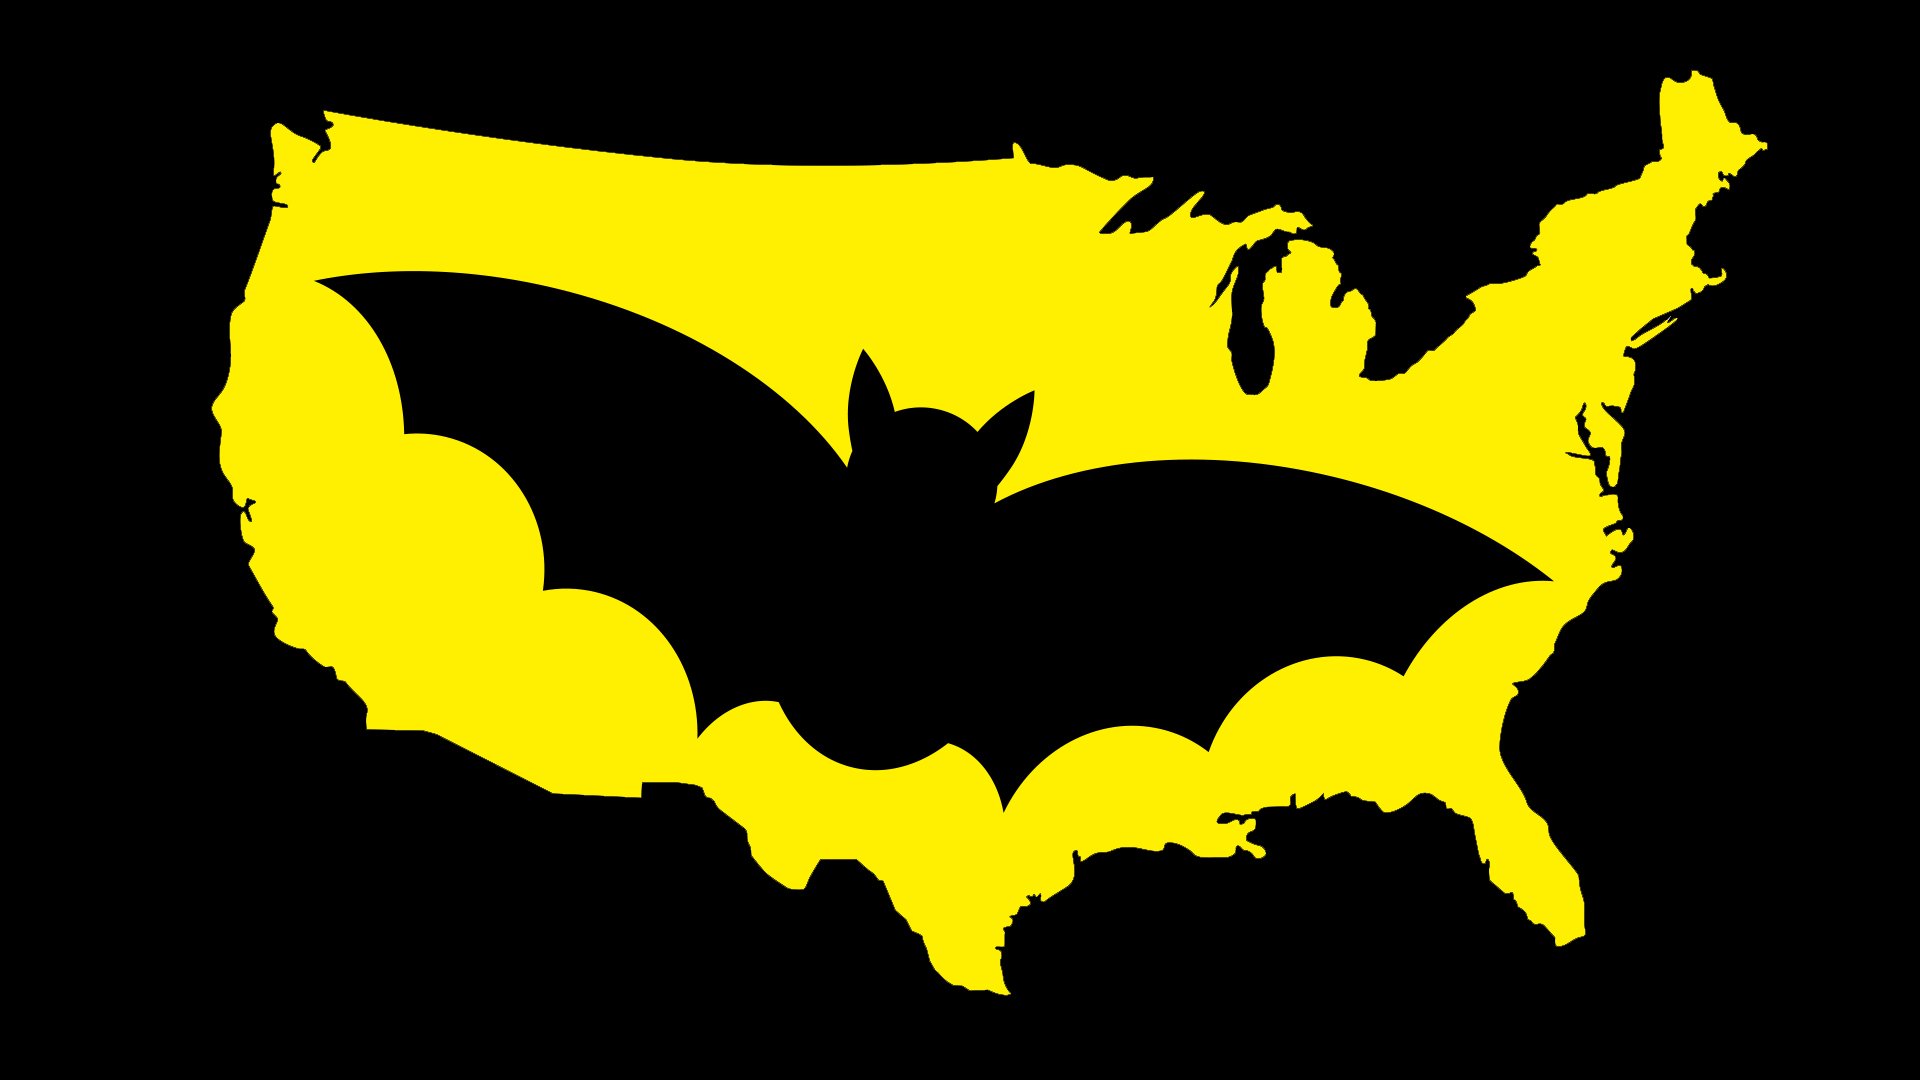 A bat symbol on an outline of the USA